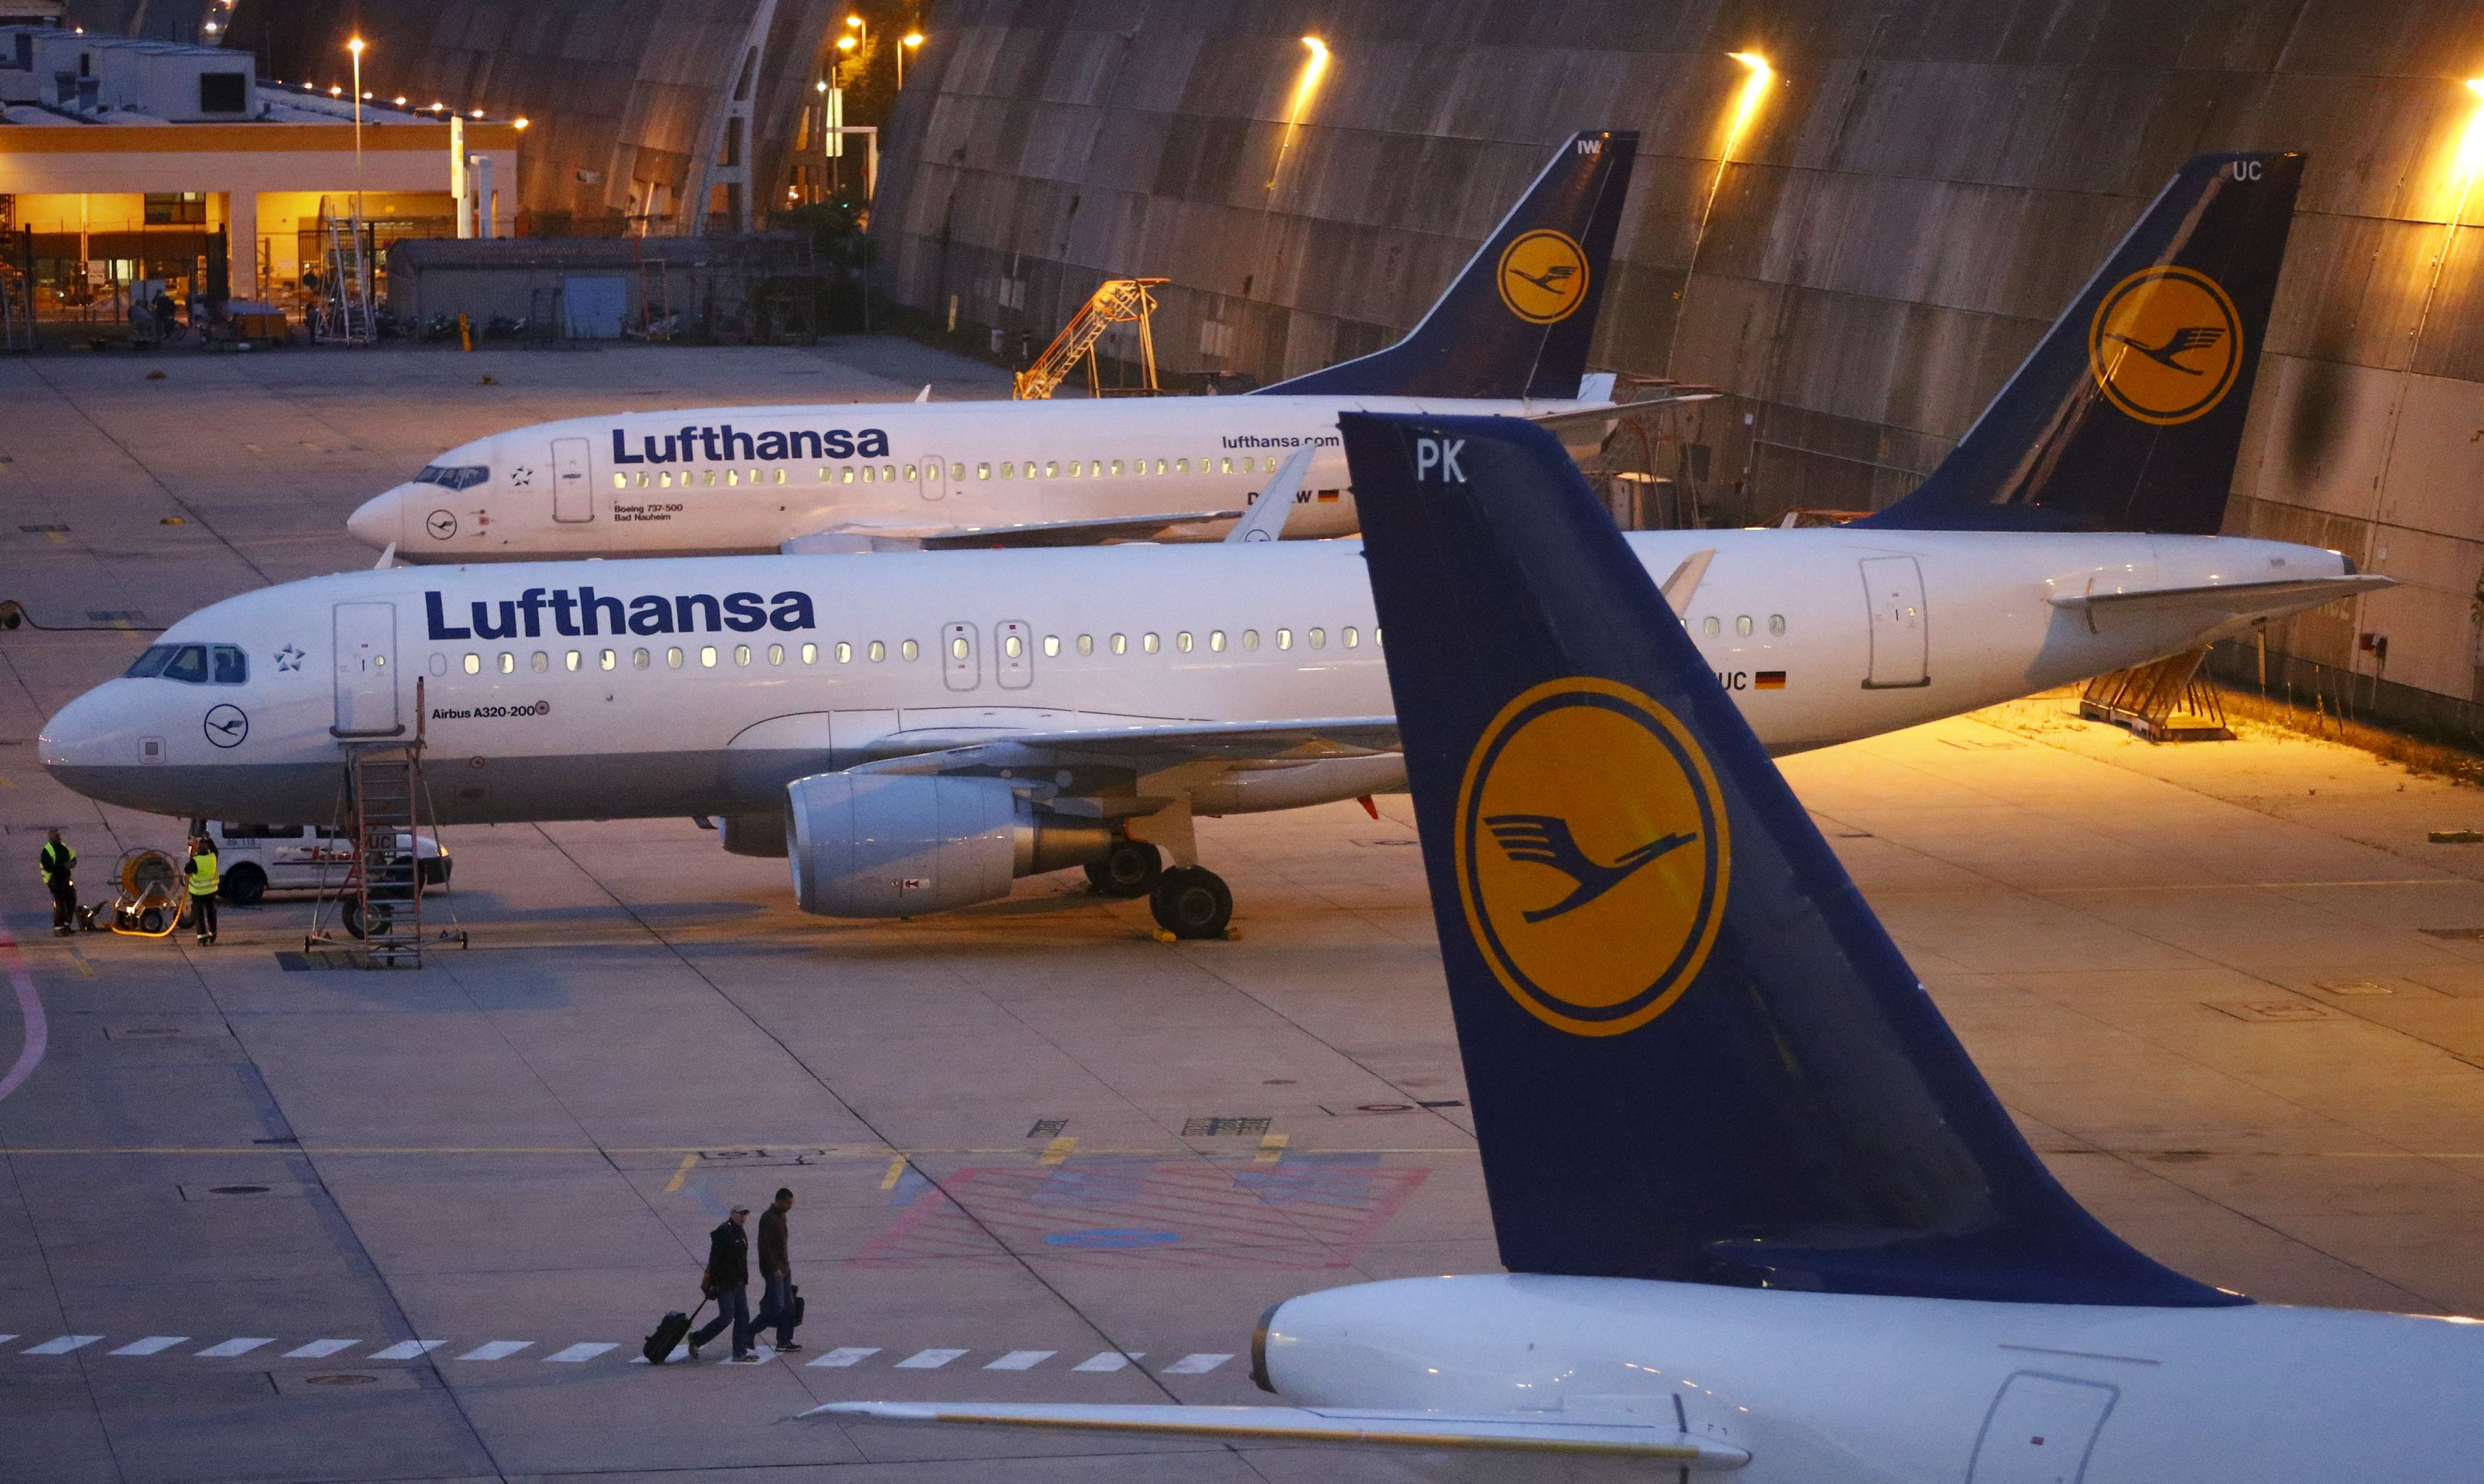 Passenger planes of German air carrier Lufthansa are parked at the technical maintaining area at the Frankfurt Airport in Germany, early morning September 9, 2015. Pilots at German airline Lufthansa started a second day of strikes on Wednesday, grounding around 1,000 flights and affecting 140,000 passengers, and said more strikes would come if management did not improve their offer in a row over cost cutting. REUTERS/Kai Pfaffenbach